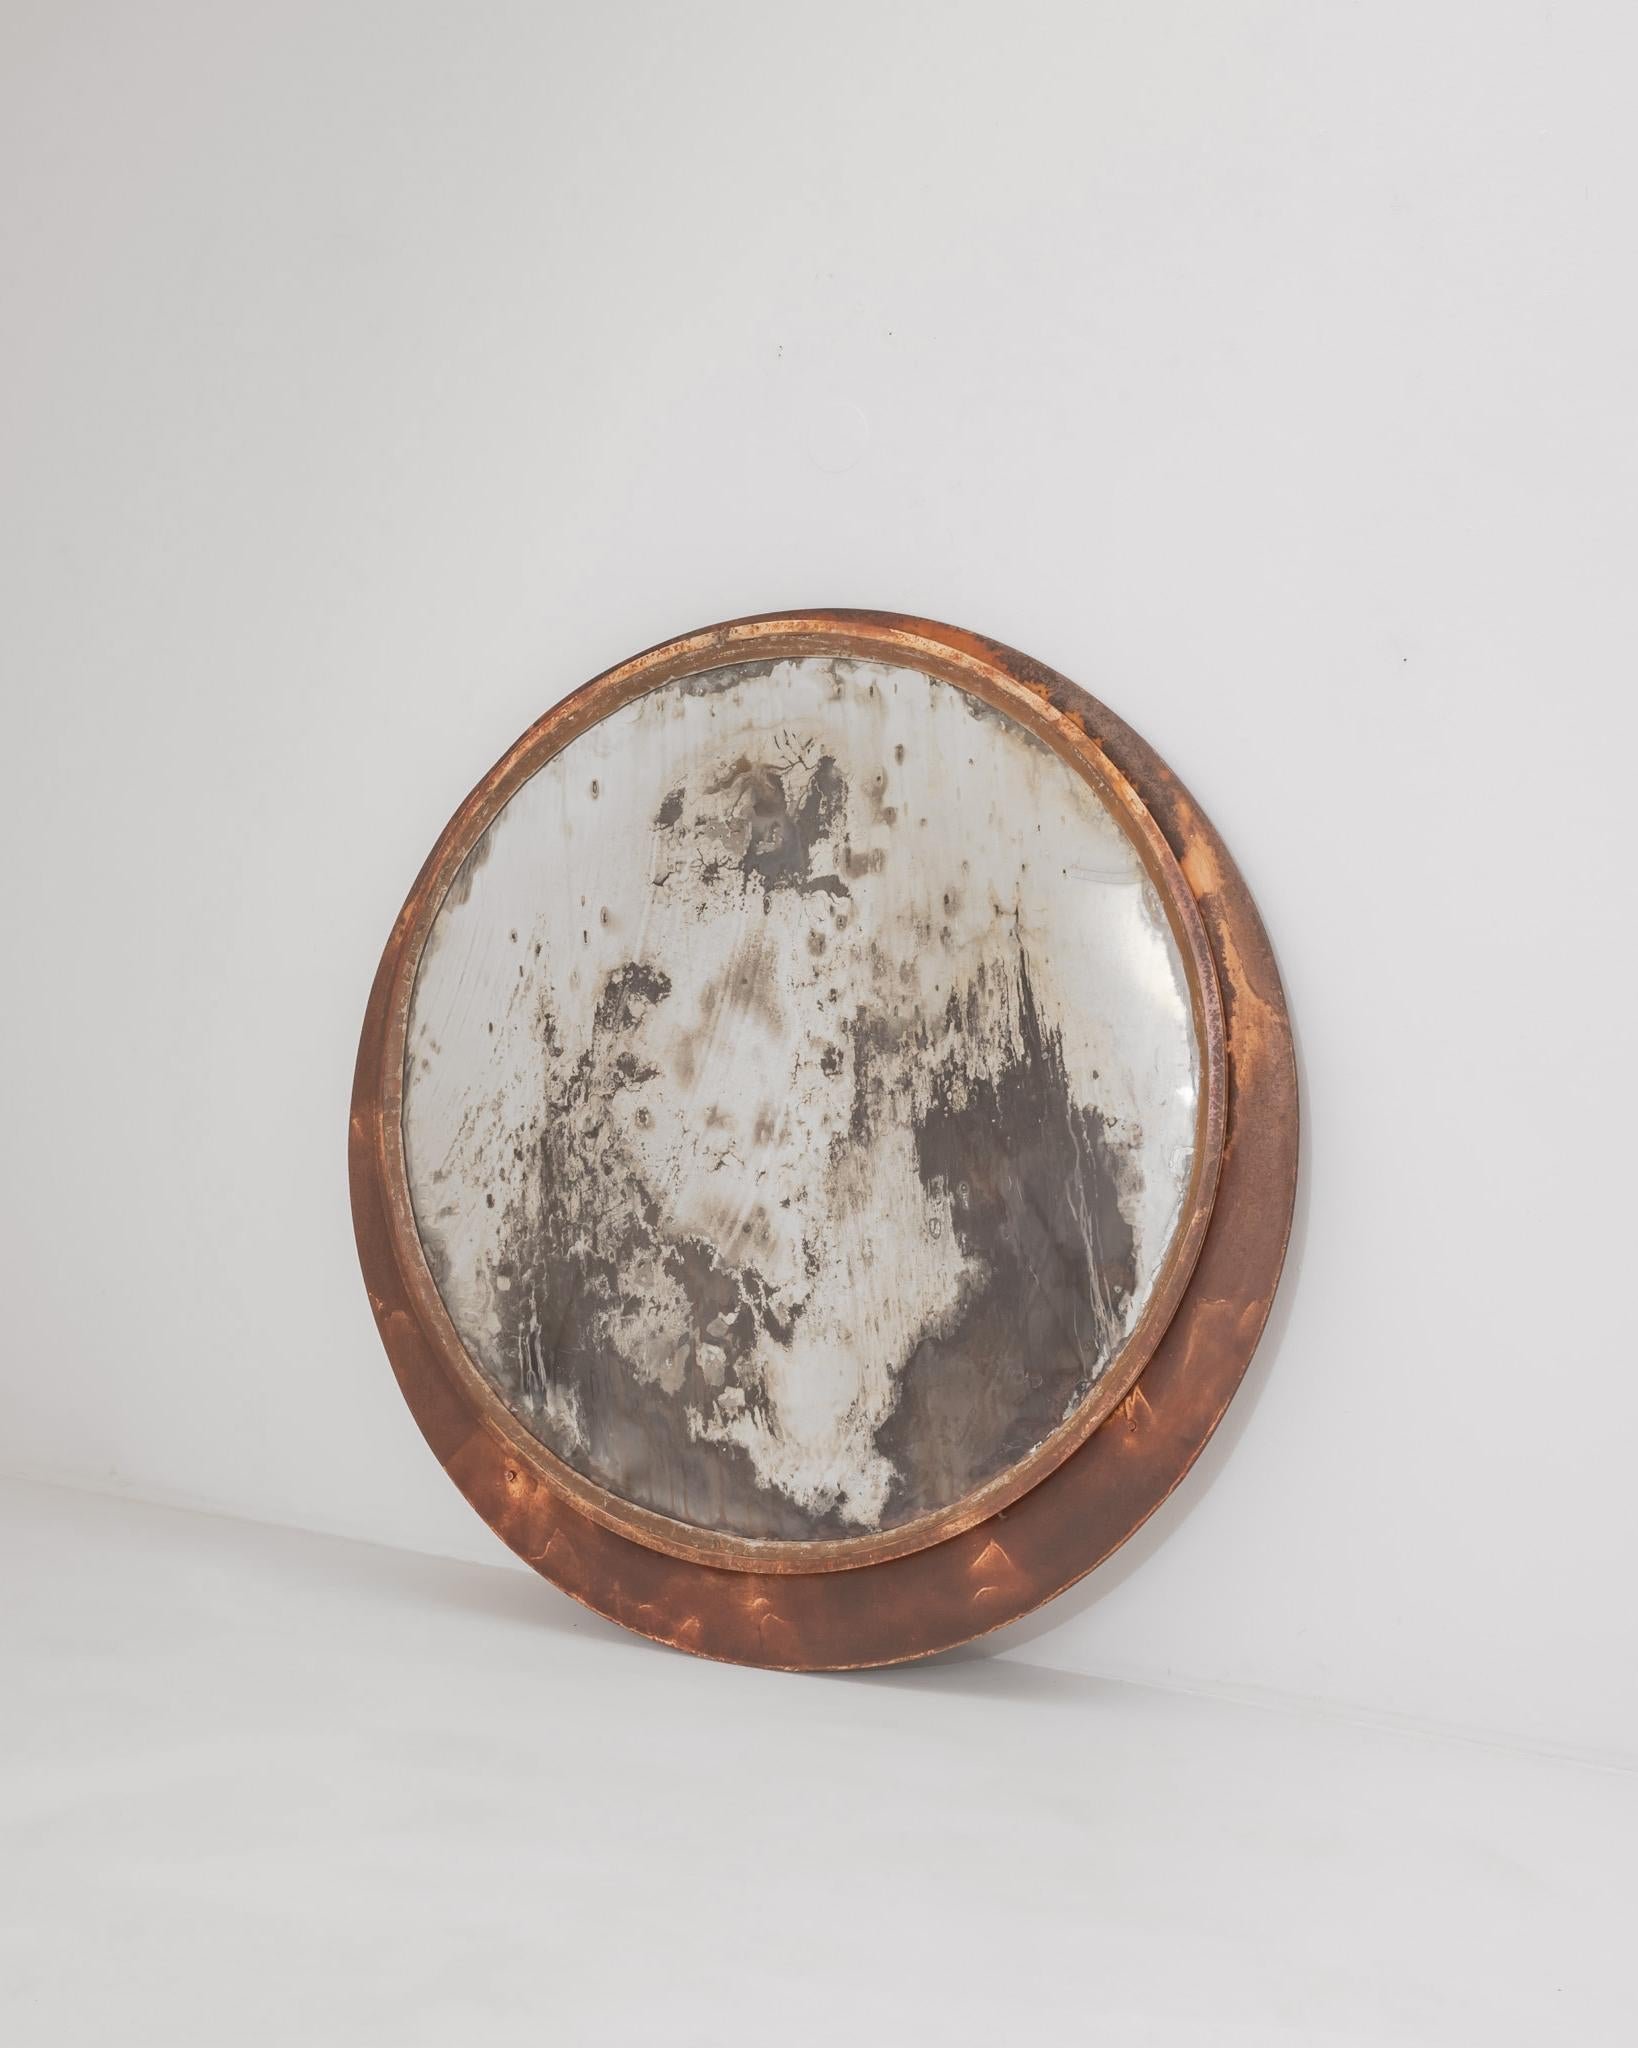 The dramatic patina of this vintage metal mirror lends it a sculptural presence. Made in Czechia in the 1960s, the mirrored disk is set asymmetrically within a circle of painted metal. The silver surface has tarnished to reveal the dark charcoal